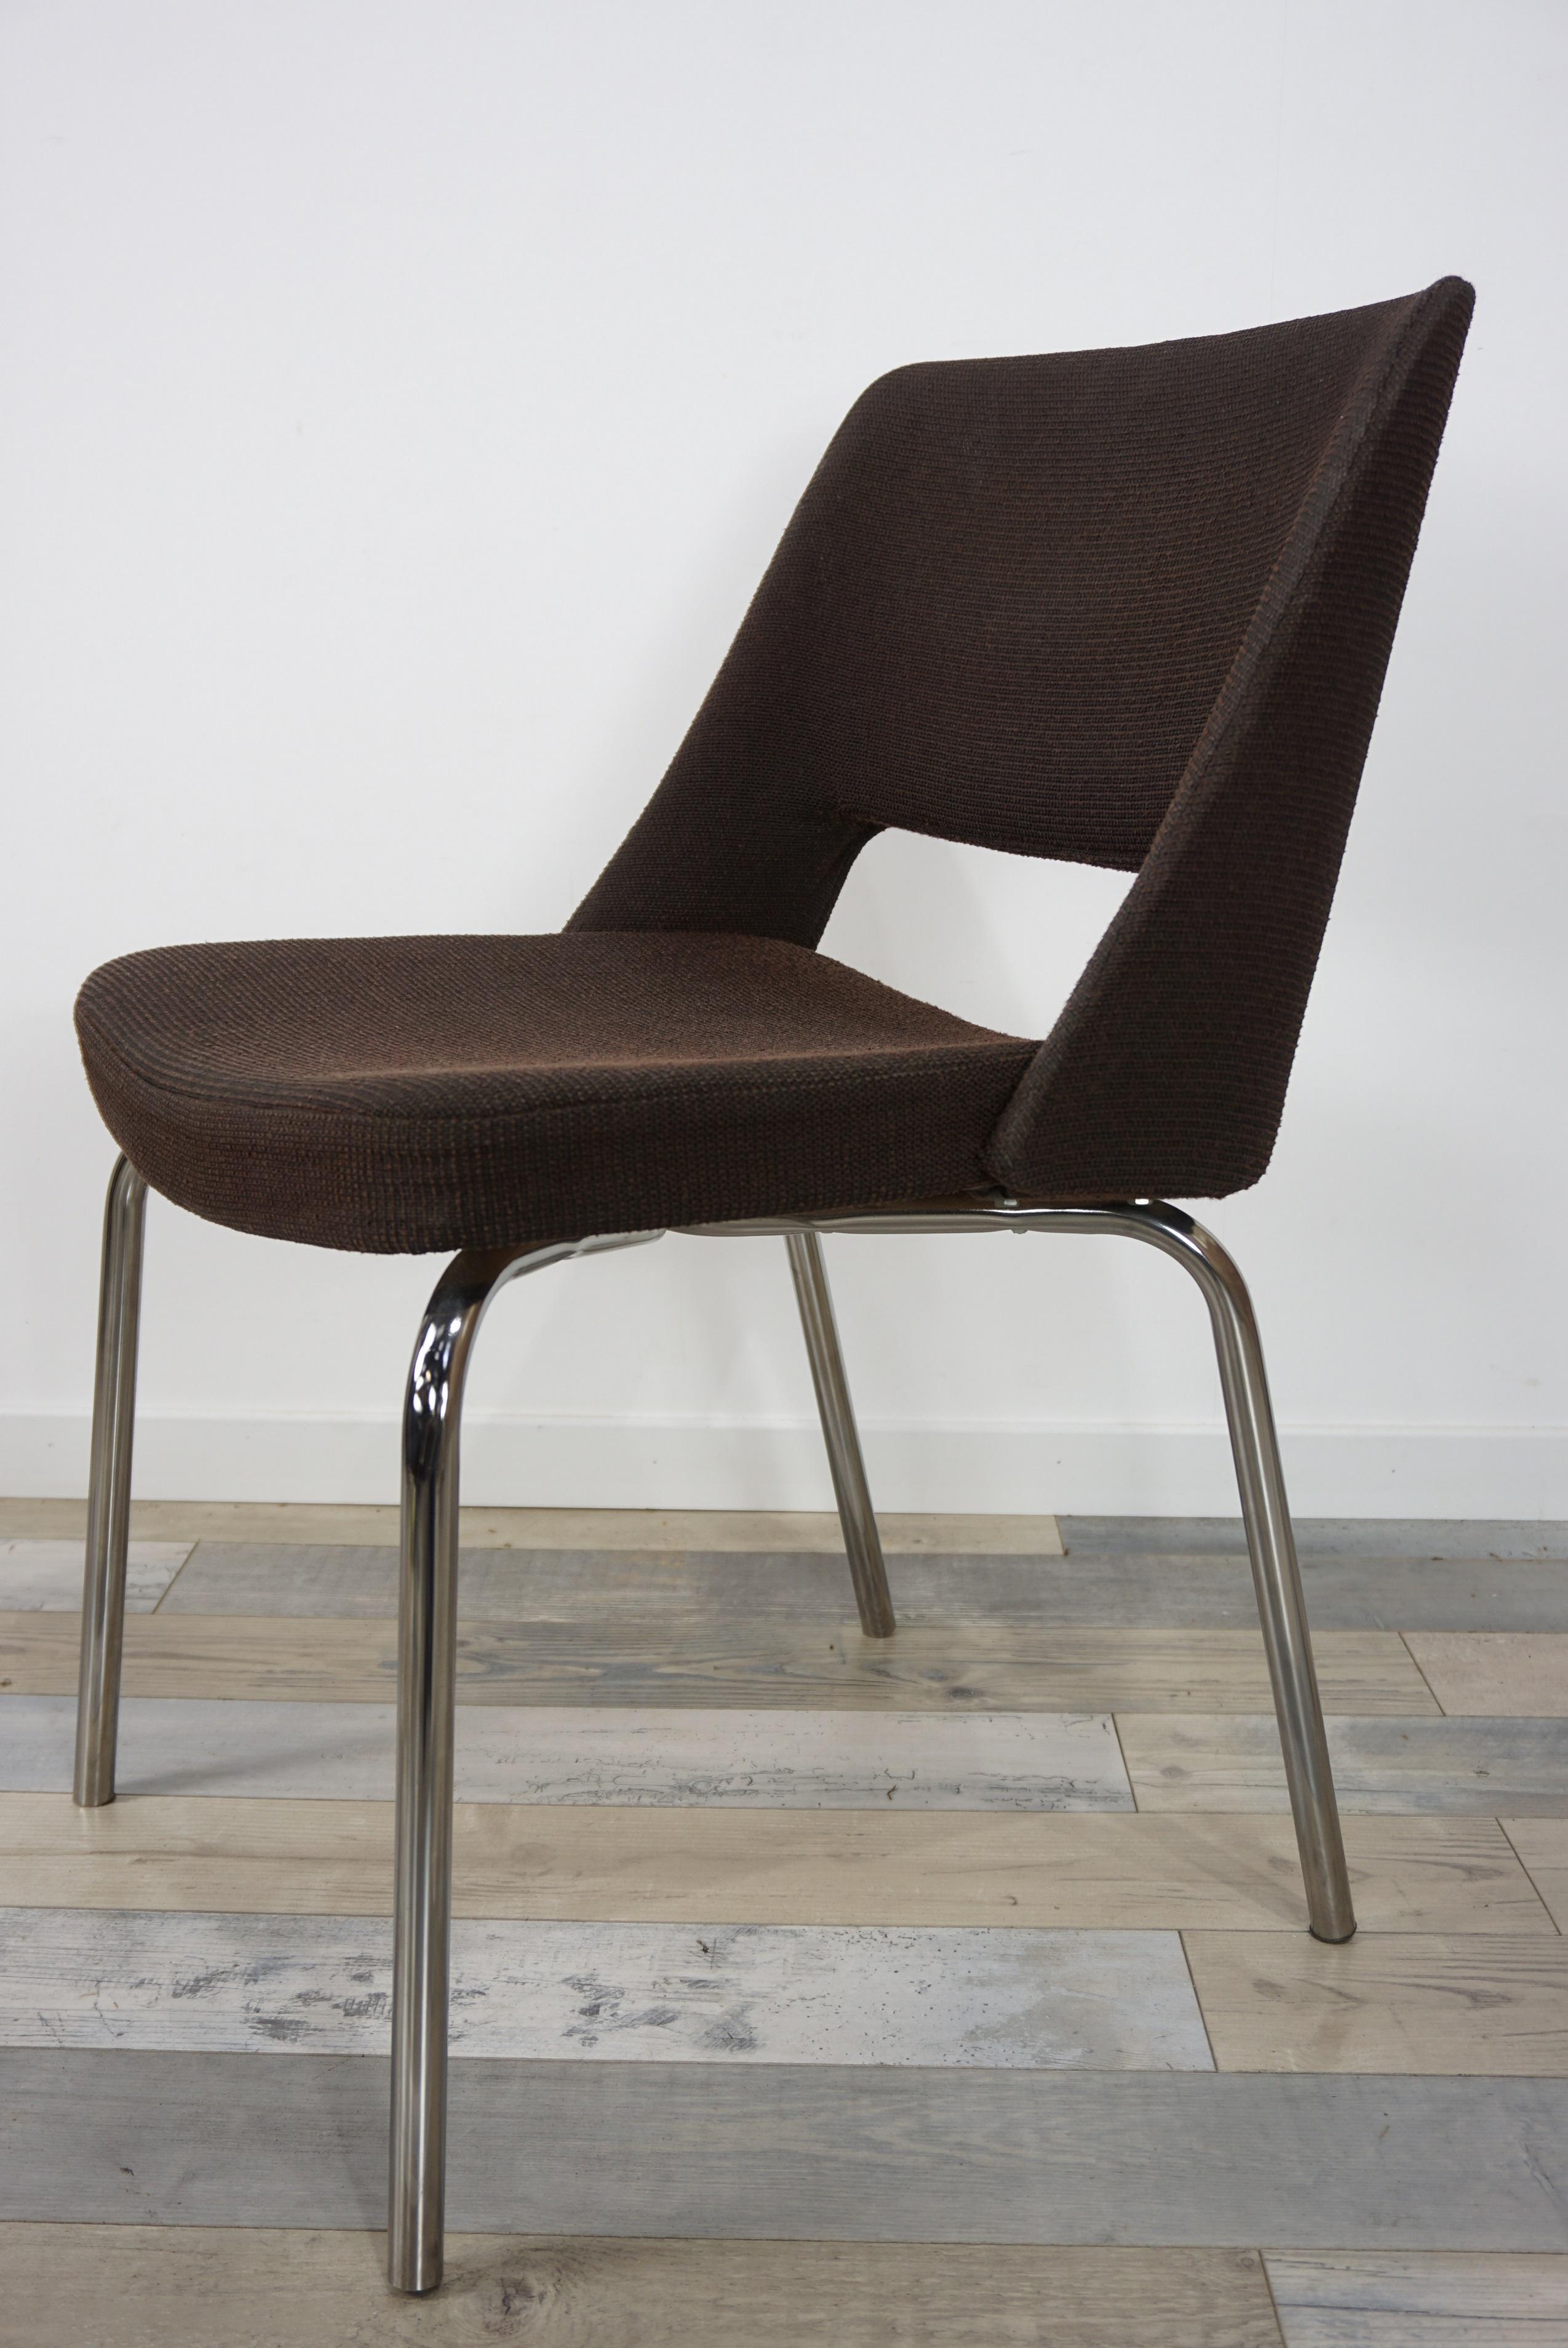 This Saarinen style conference chair is extremely comfortable and in a very good condition. Dark and brown fabric with chromed tubular feet. All in perfect condition.